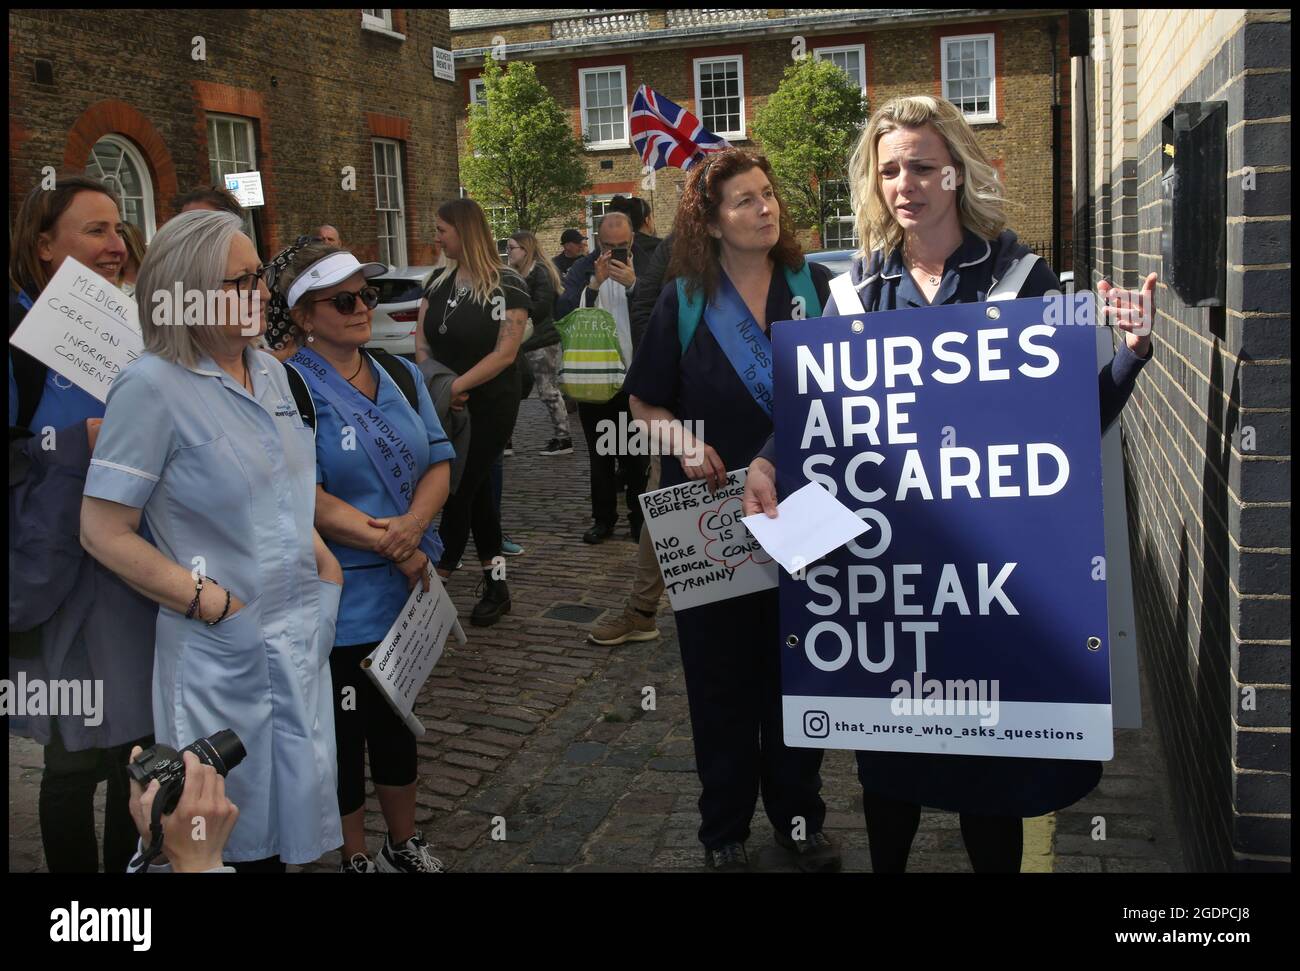 London, UK. 12th May, 2021. Health professionals and their supporters join nurse Jenna Platt outside the Nurses Midwifery Council.Jenna is currently walking around the UK wearing a sandwich board that encourages debate, visiting all 69 cities to highlight how Covid care has left nurses unhappy and too scared to question policy for fear of losing their jobs. Some health workers have spoken of bullying, coercion and being ostracised. Many feel if they ask questions, they are seen as being part of the problem. Jenna delivered a letter of complaint to The Nursing Midwifery Council in Lo Stock Photo